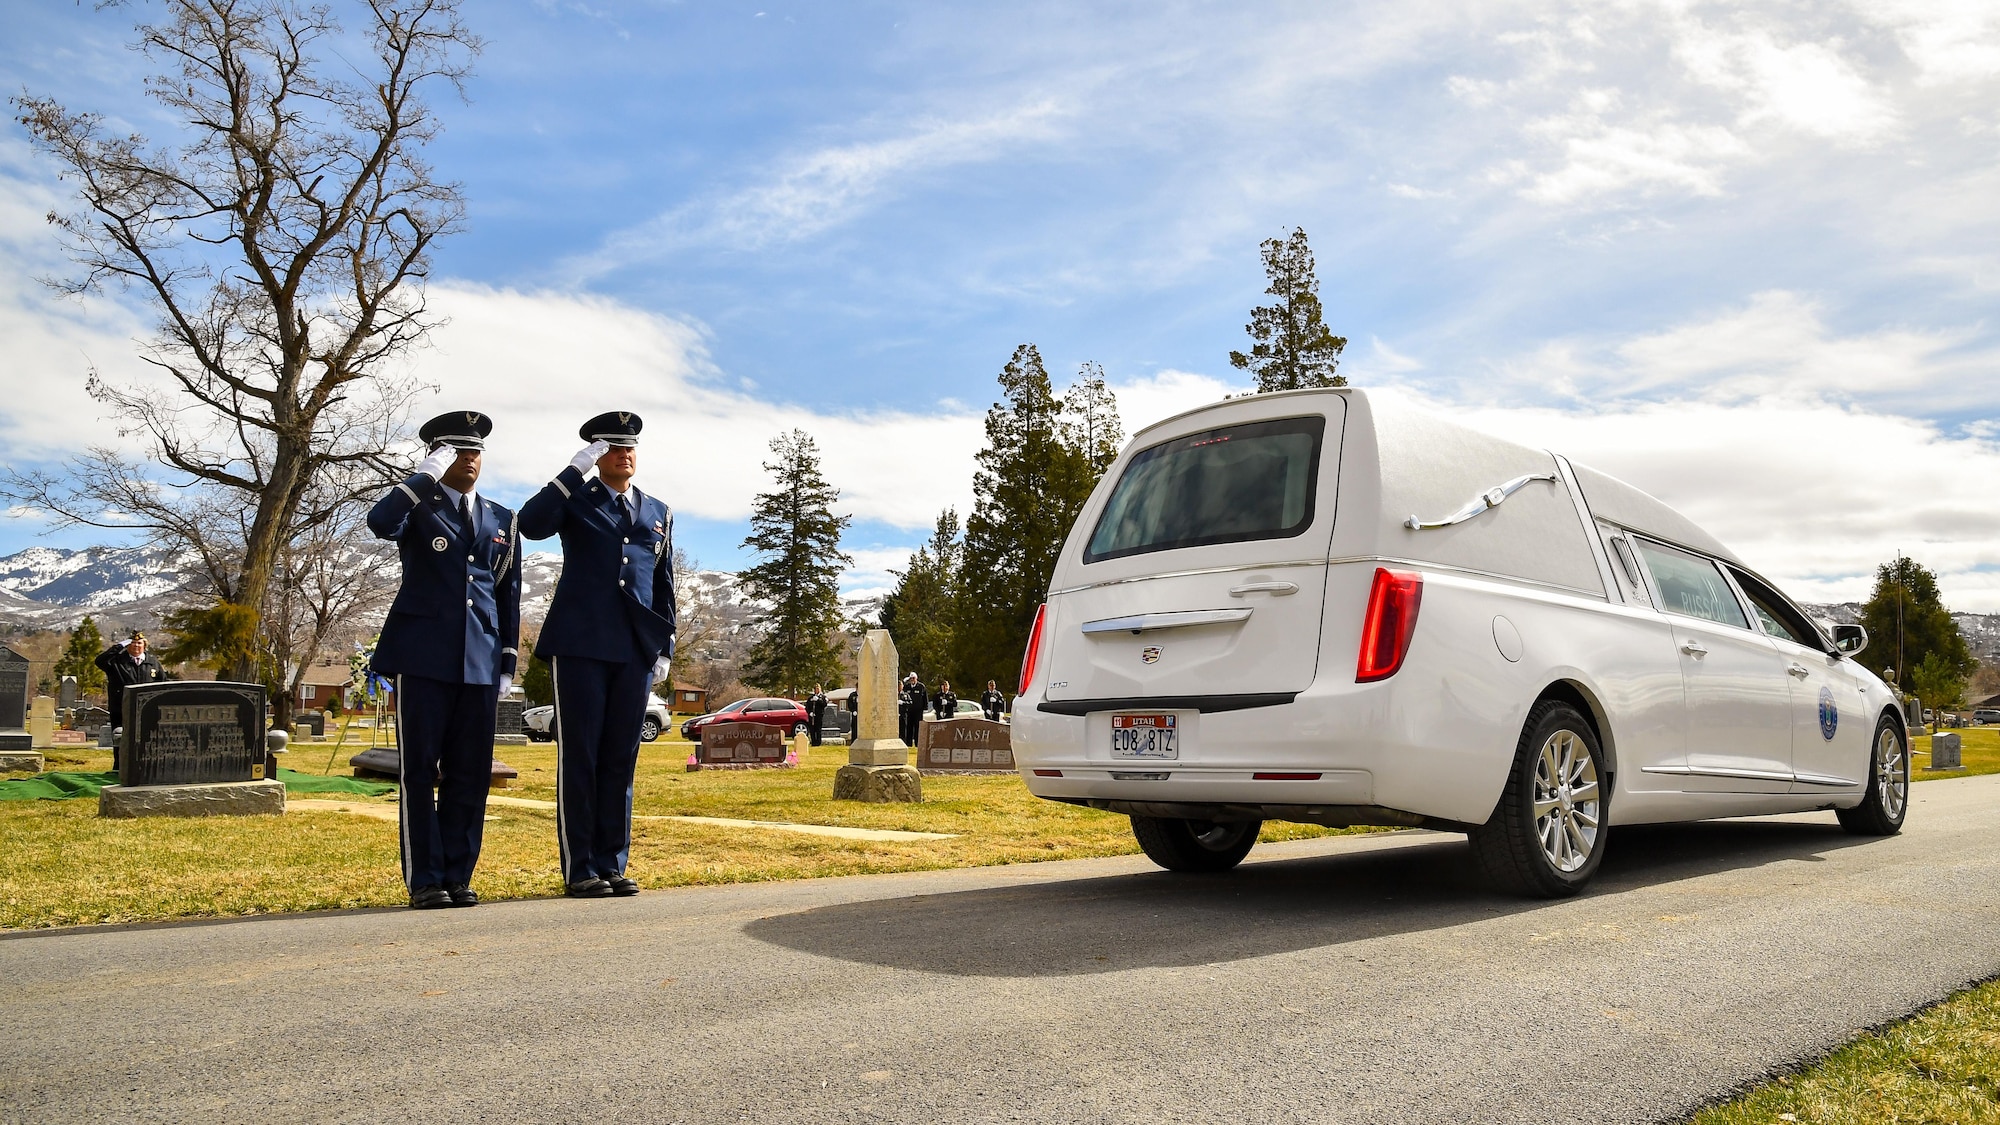 Hill AFB Honor Guard members Airman 1st Class Santos Vargas and Senior Airman James Fahrner render salutes as a hearse arrives during a veteran’s funeral service, Bountiful, Utah, March 8, 2017. Hill’s honor guard members provide professional military funeral honors for active duty, retired members and veterans. (U.S. Air Force photo/R. Nial Bradshaw)